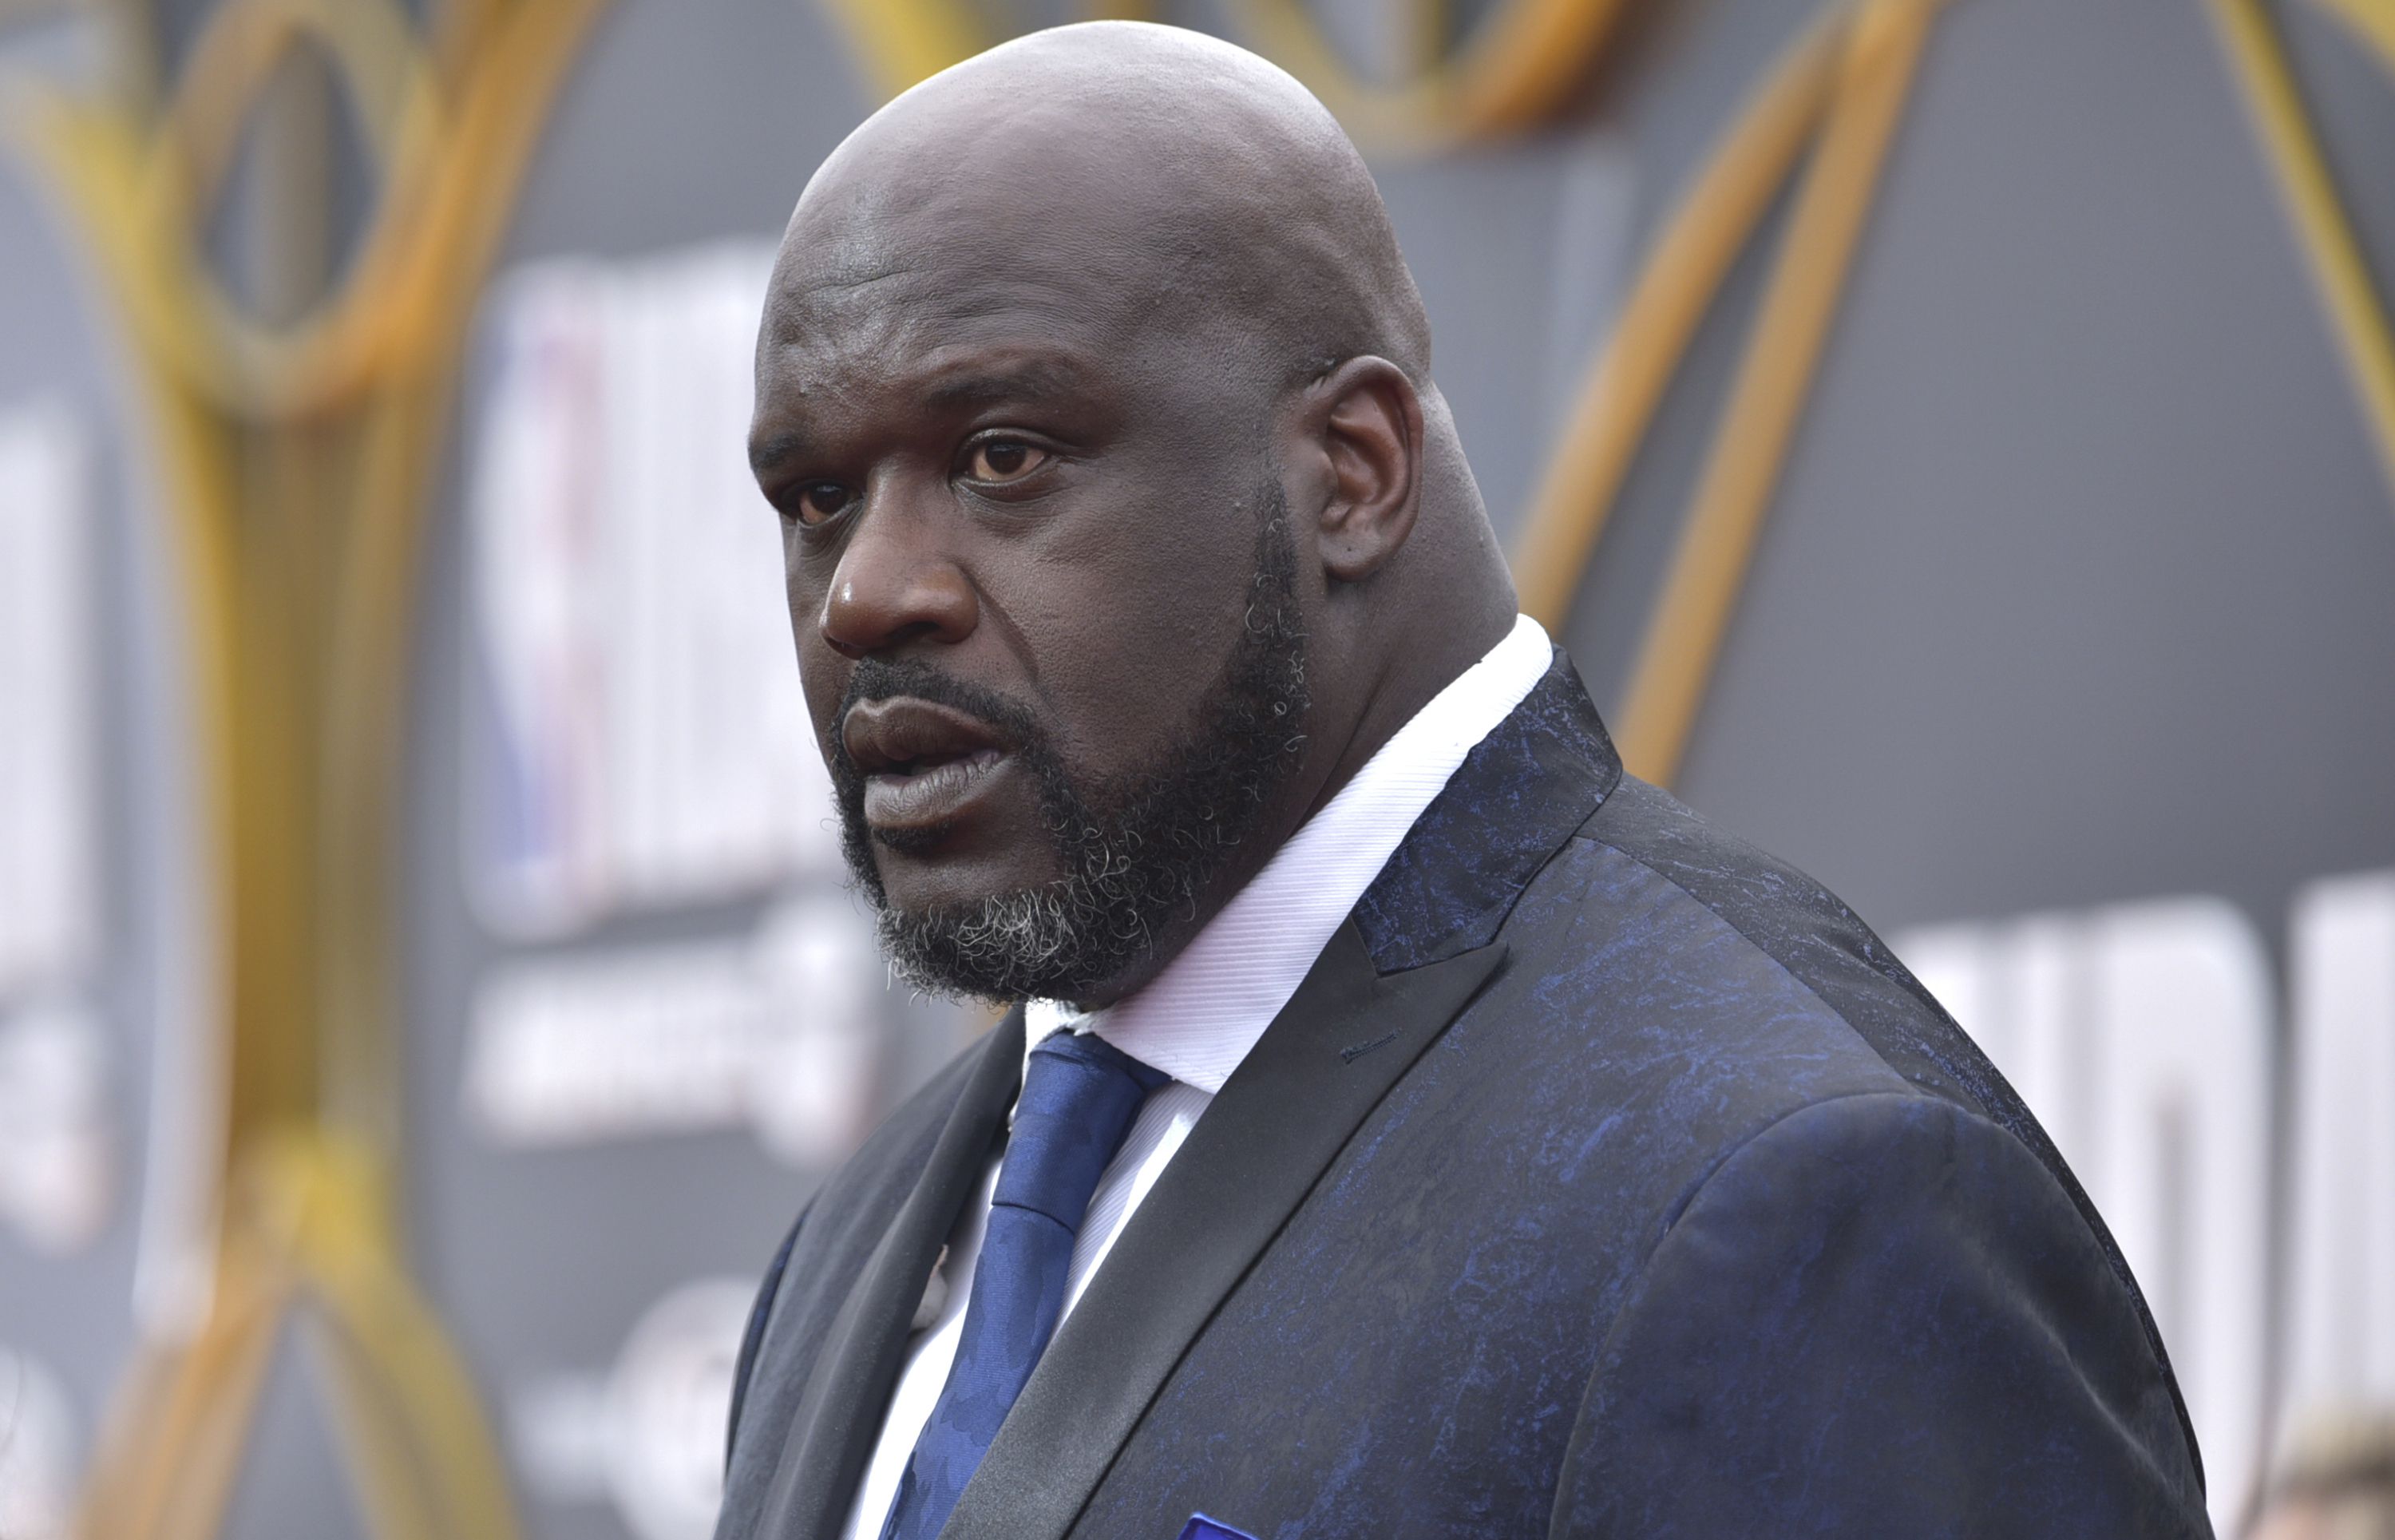 Shaquille O'Neal cites how being able to buy mother Lucille O'Neal